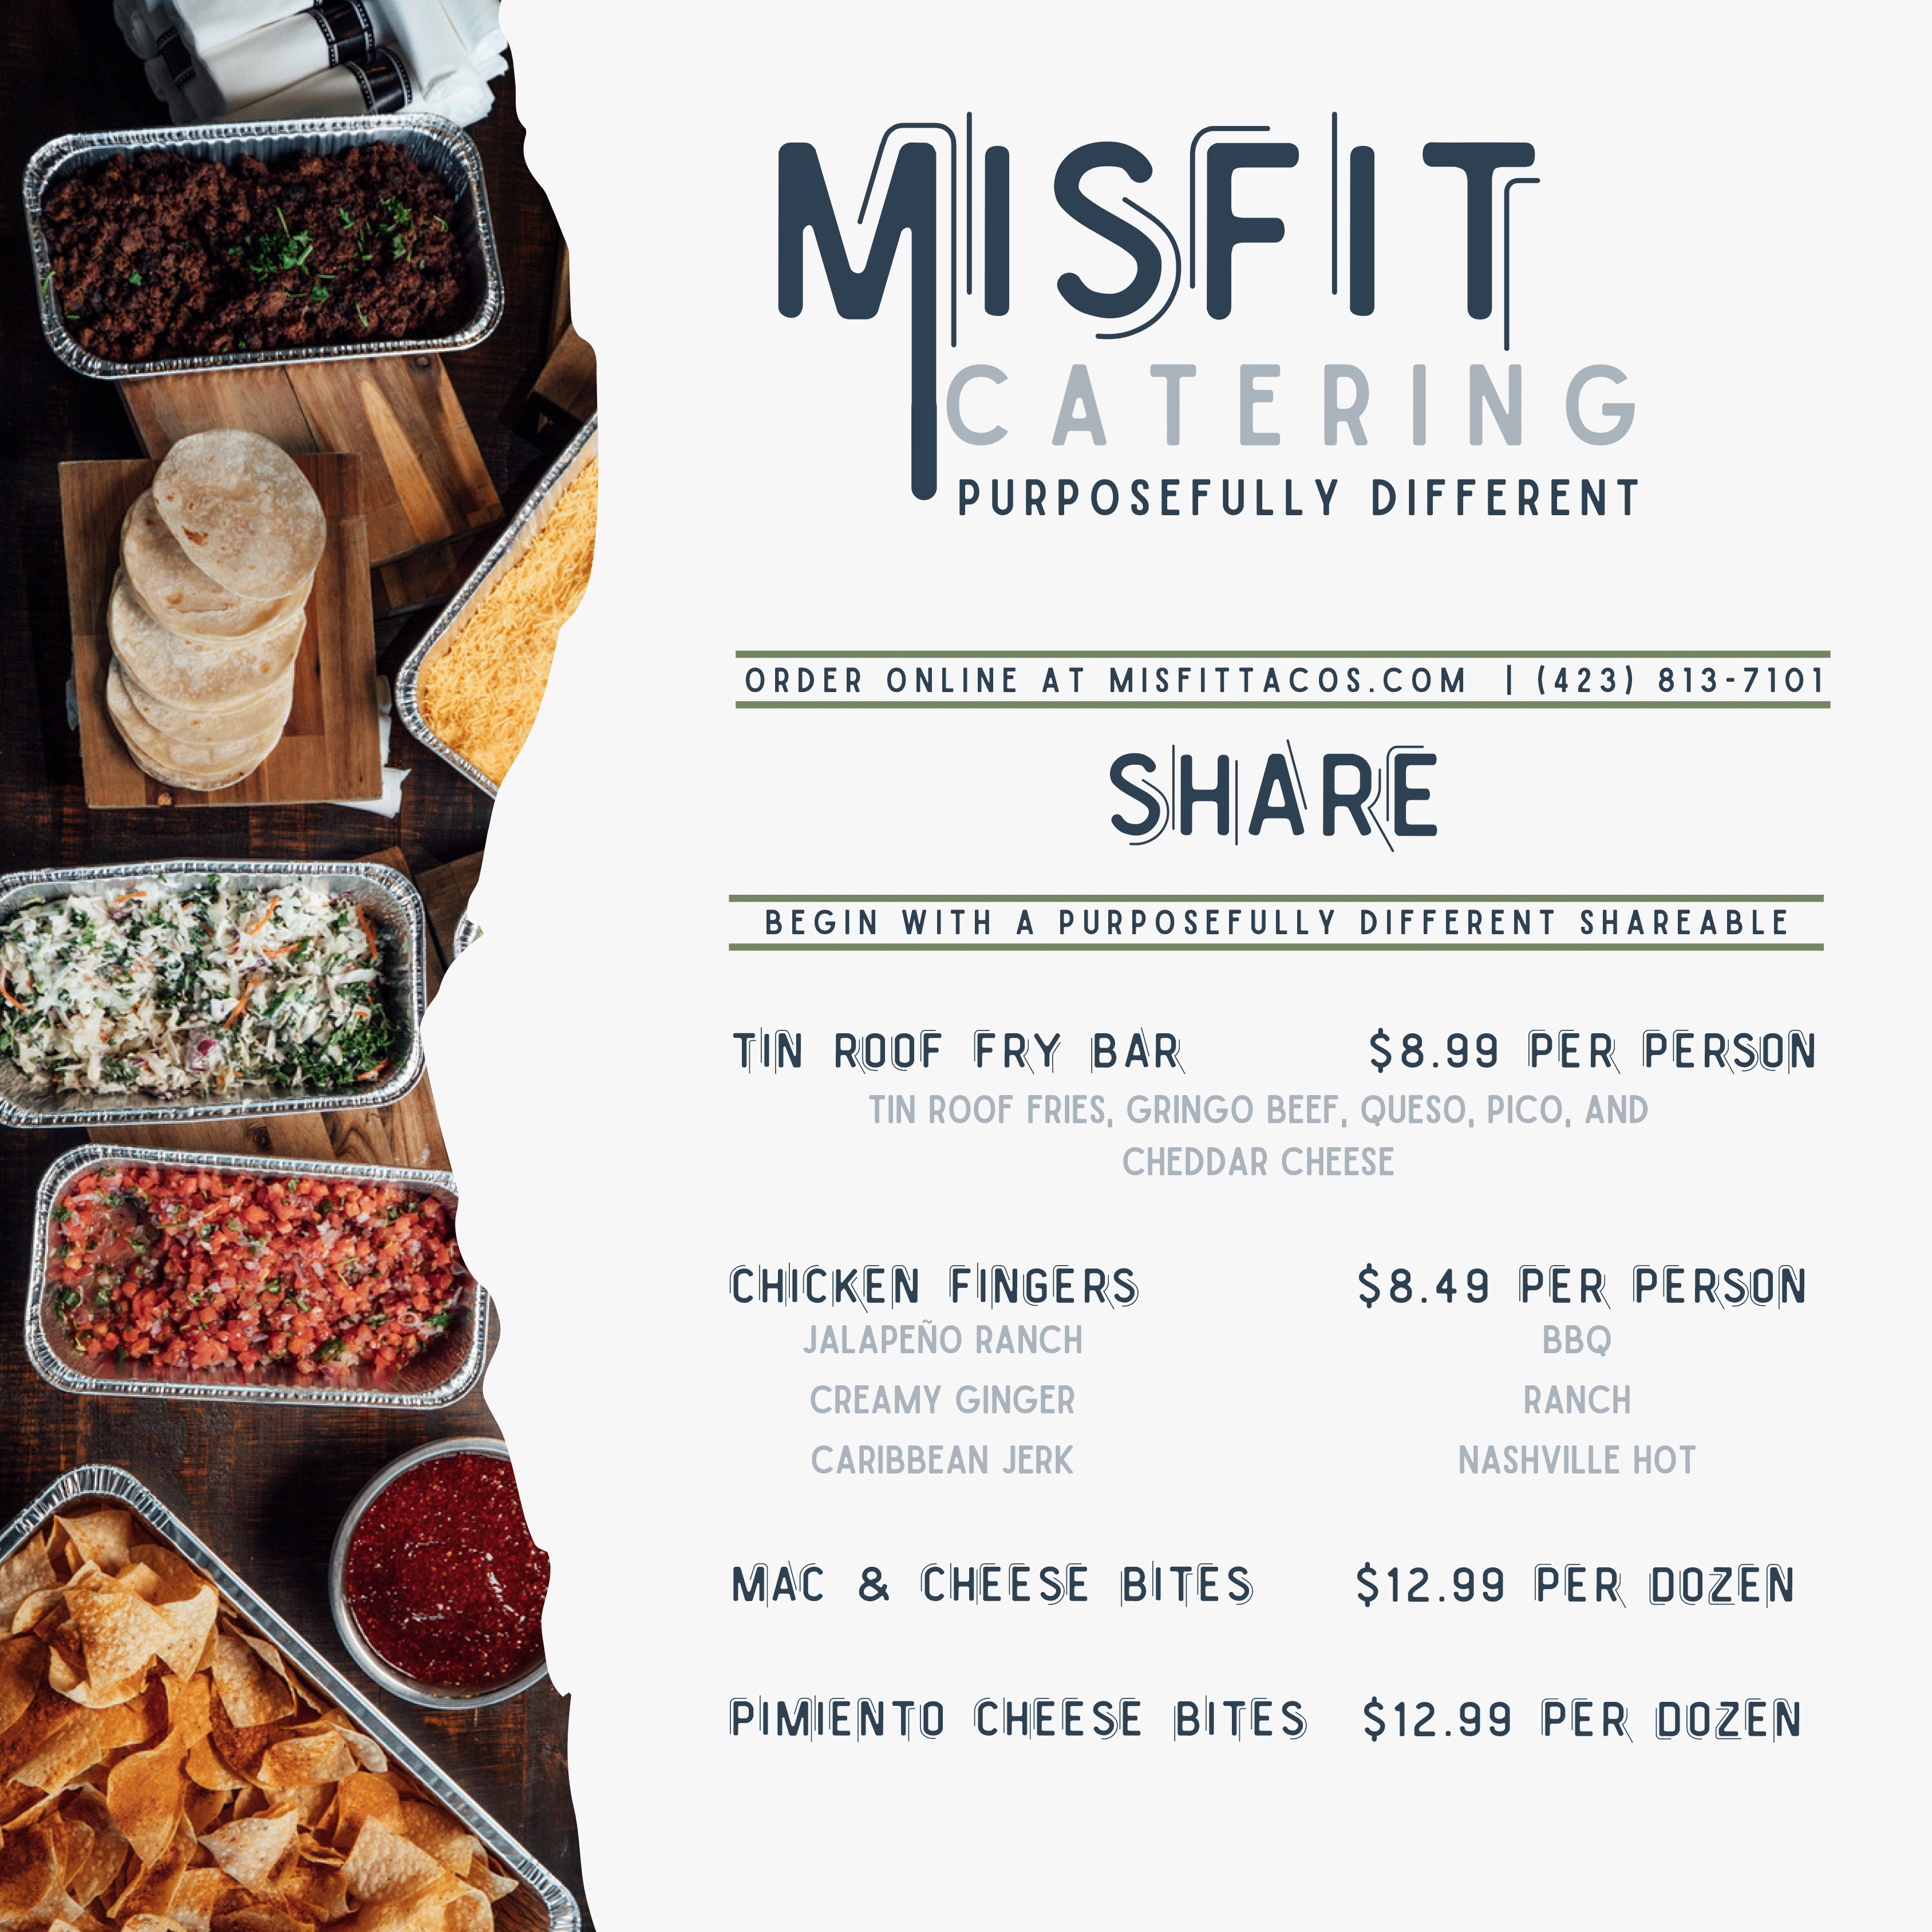 Misfit-Catering-021523-3